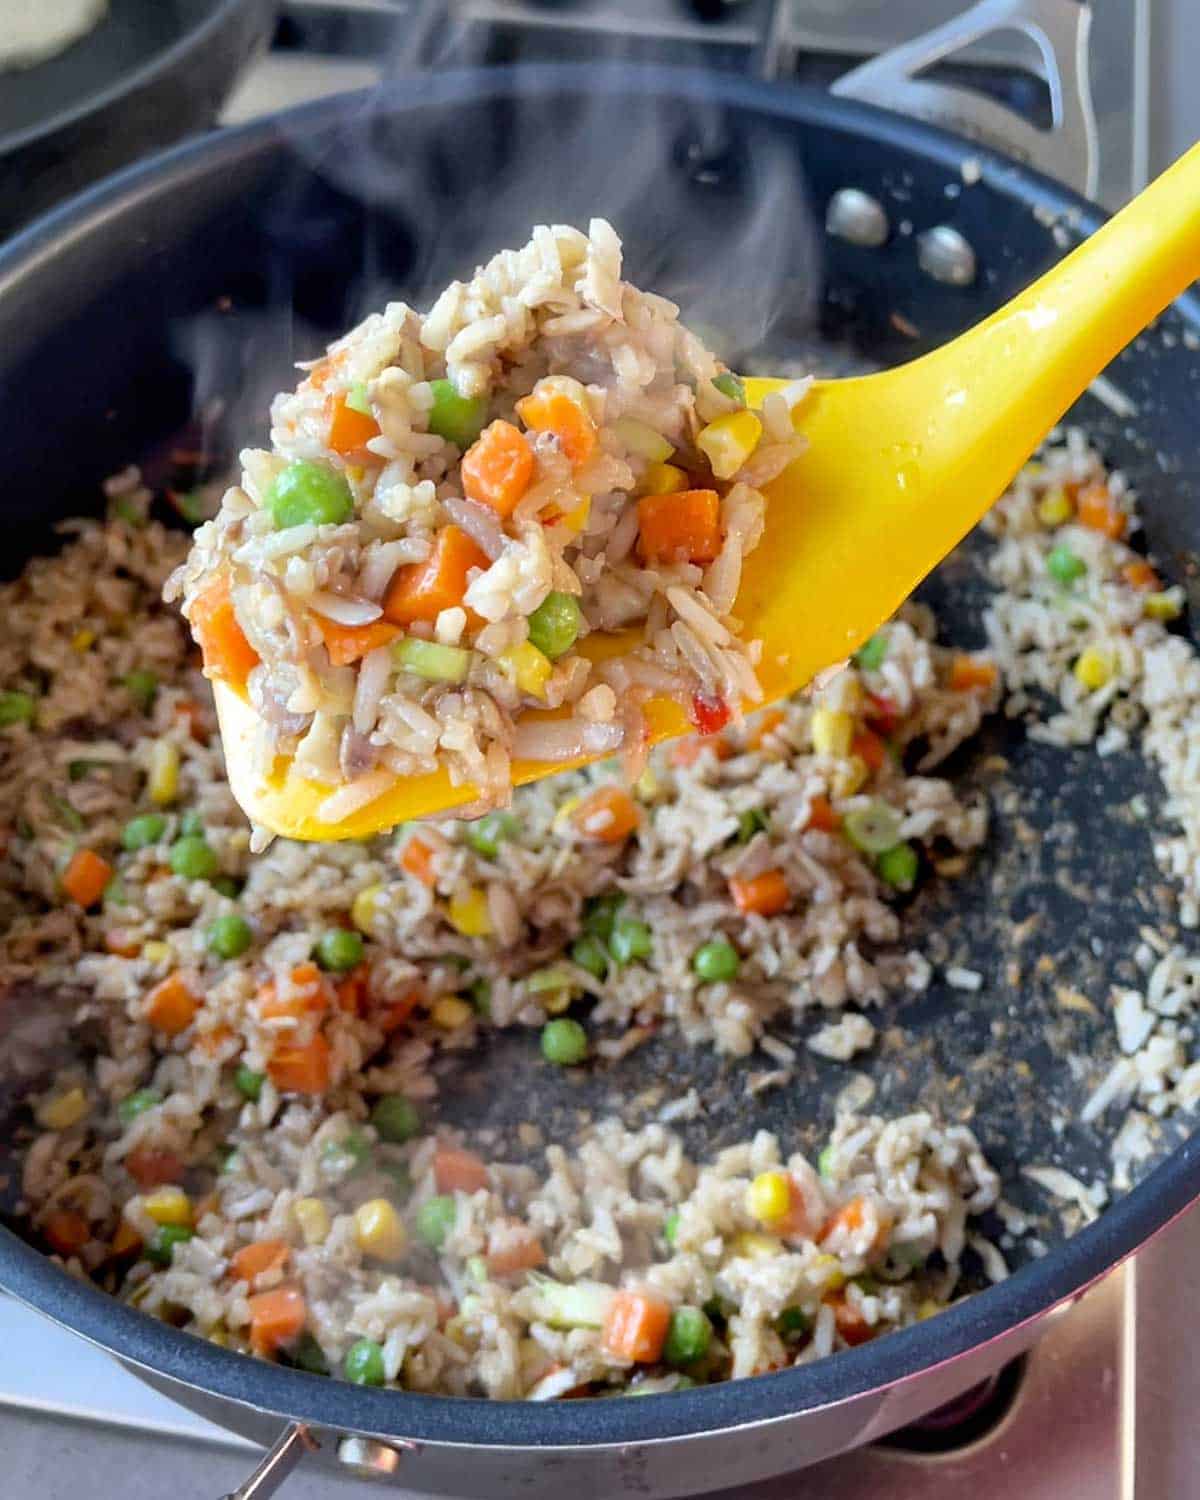 Mushroom Fried Rice being stirred in a frying pan.